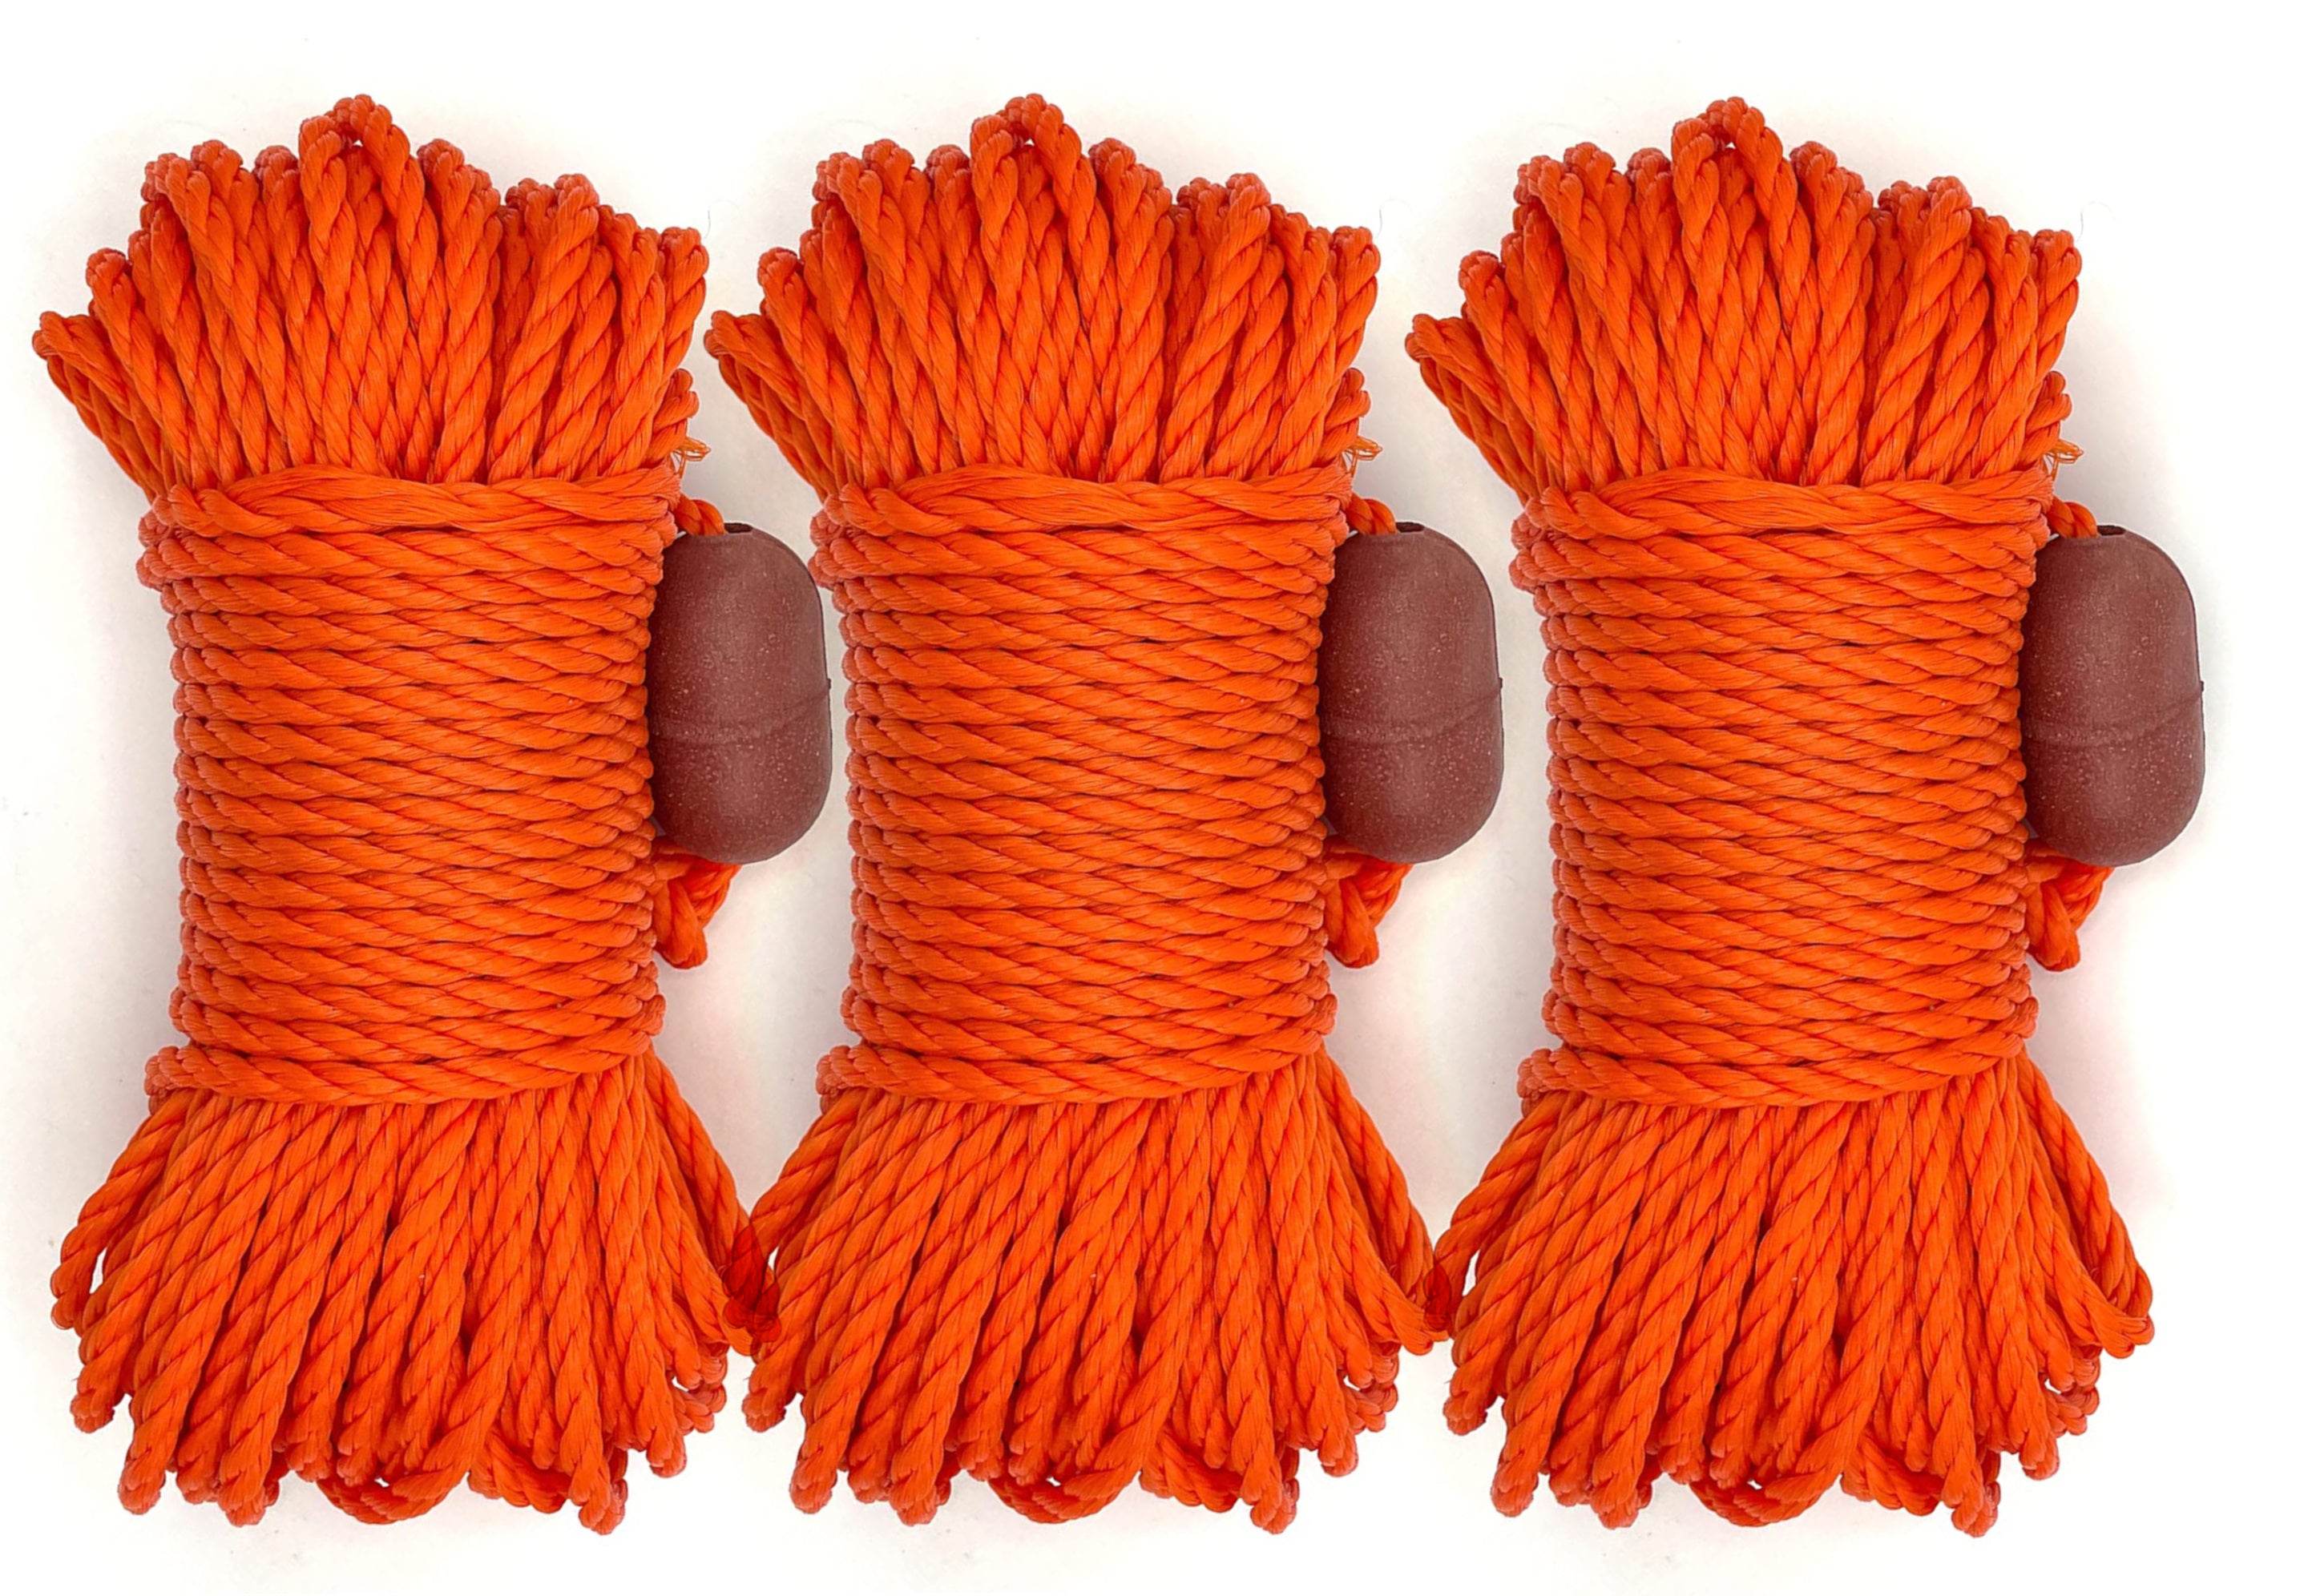 AirFly Poly Line Rope and Float for Crab Trap, Lobster Trap, Prawn Trap,  100 Feet, 1/4 Inch, Orange, 3 pieces